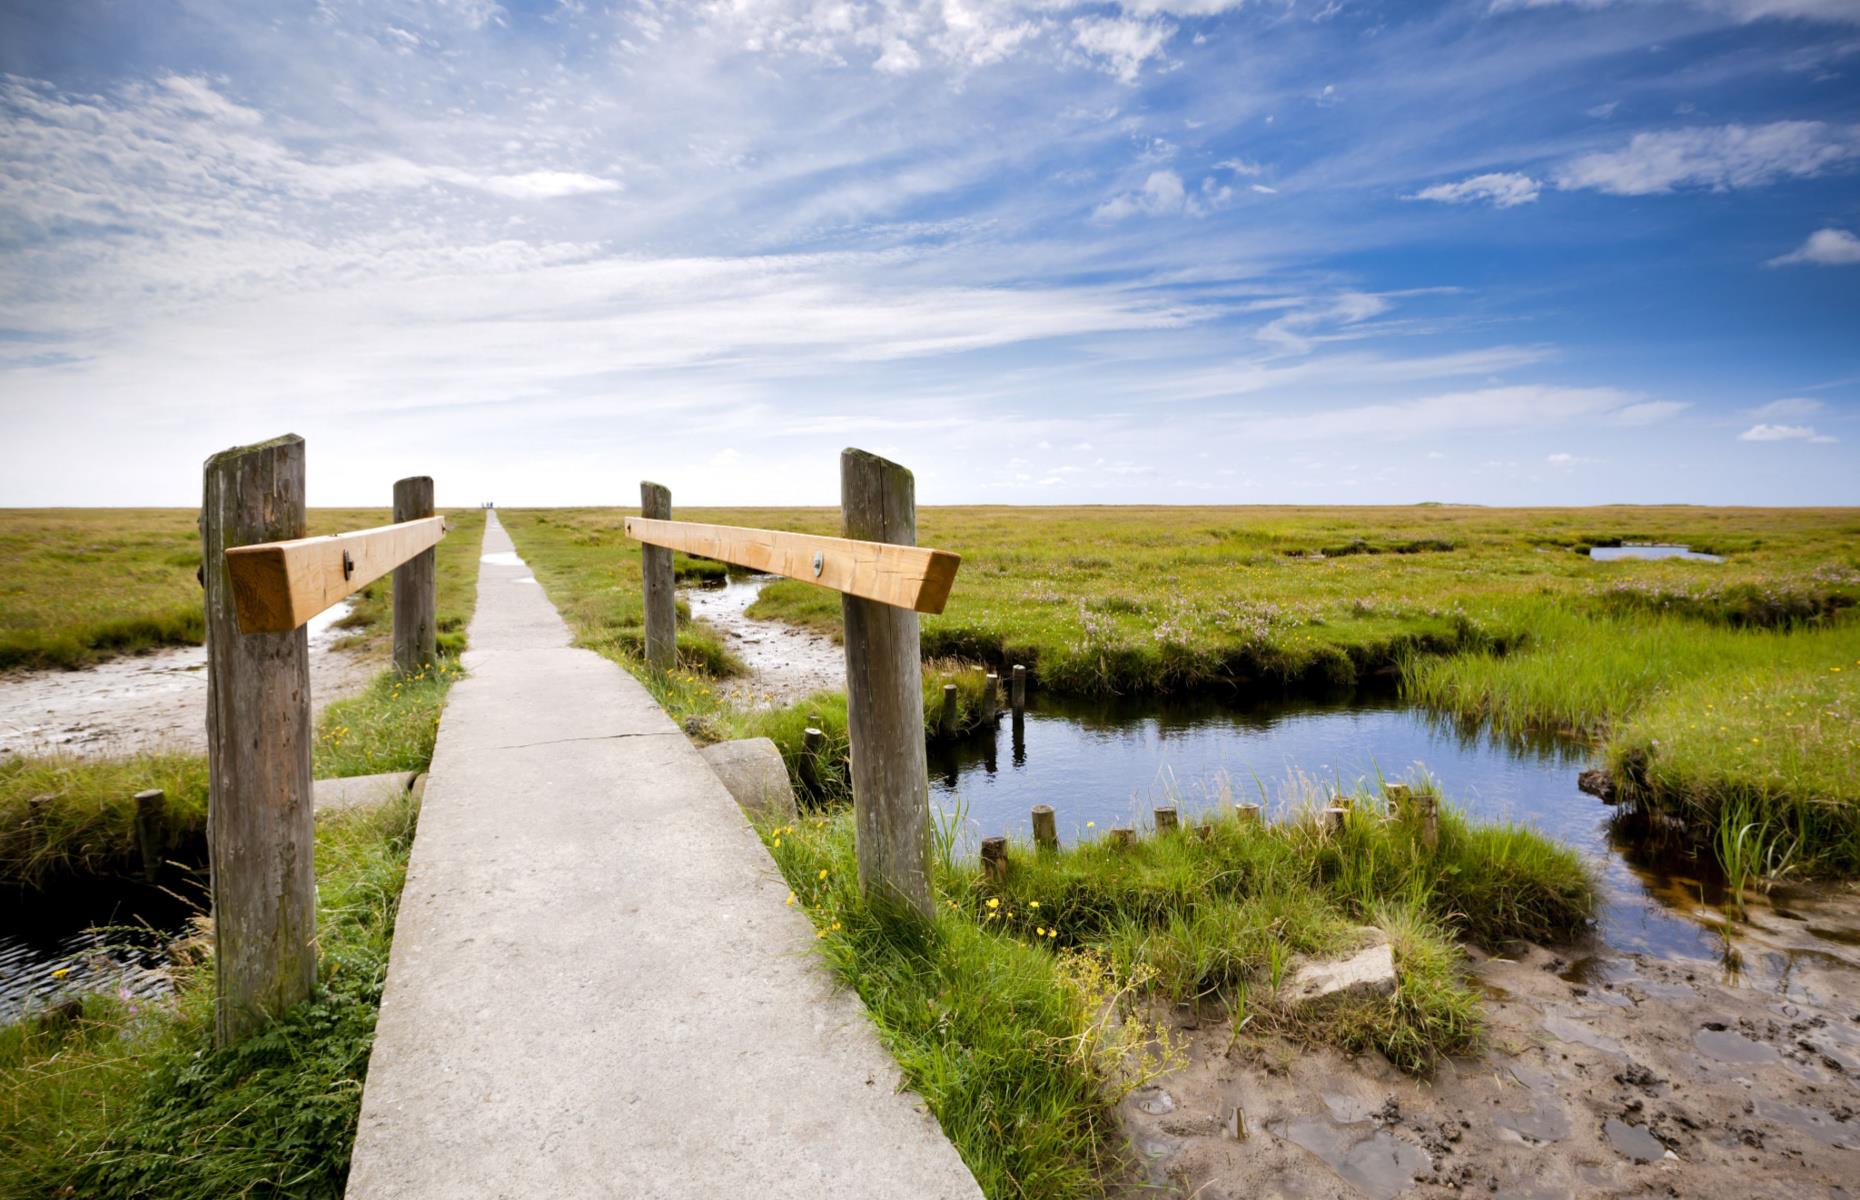 <p>Germany has three national parks in the Wadden Sea in the northwestern part of the country, near Denmark. <a href="https://www.germany.travel/en/nature-outdoor-activities/schleswig-holstein-wadden-sea-national-park.html">This one</a> is remarkable in that it contains the world’s largest continuous area of mudflats, formed as a result of the ultra-flat shorelines. The salt marshes and sand dunes give the park a distinctive look and also create a home for a unique collection of plants and animals, with seals, porpoises, starfish and birds that can be spotted as visitors explore on foot or by bike.</p>